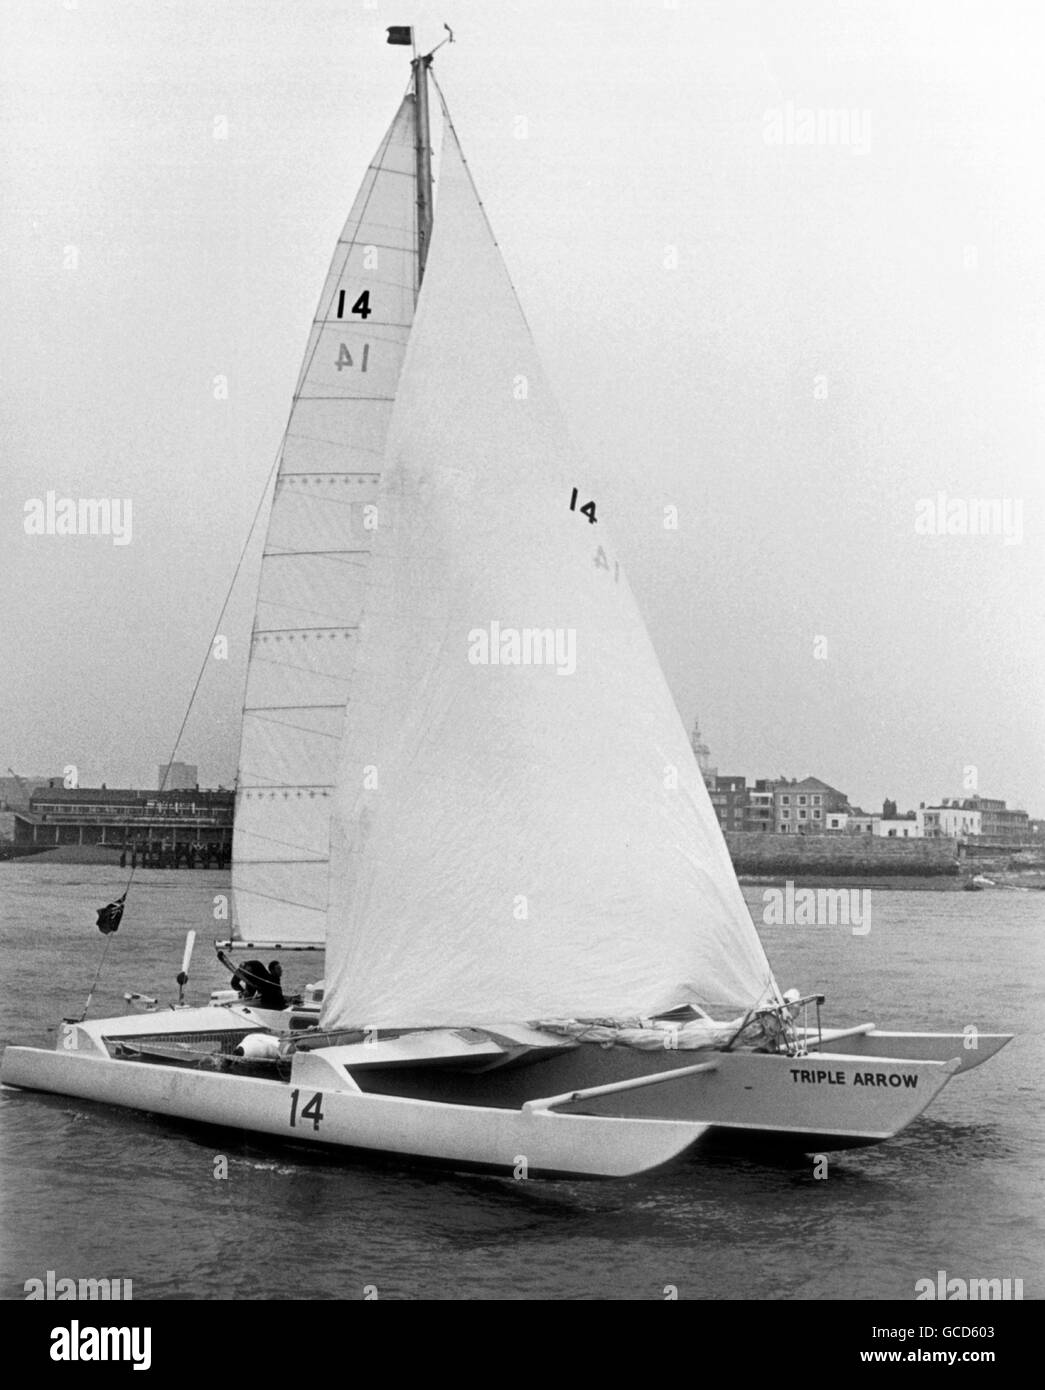 AJAX NEWS PHOTOS. 4TH MAY, 1974. PORTSMOUTH,ENGLAND. - BANK MANAGER SAILOR - BRIAN COOKE AND HIS CREW ERIC JENSEN SAILING THE TRIMARAN TRIPLE ARROW.  PHOTO:JONATHAN EASTLAND/AJAX REF:TRIPLE ARROW 1974 2 NOTE** FEBRUARY 20, 1976. LONE SAILOR FEARED DROWNED - 54 YEAR OLD BANK MANAGER BRIAN COOKE OF PARKSTONE, DORSET WAS FEARED DROWNED TODAY AFTER HIS TRIMARAN TRIPLE ARROW WAS FOUND CAPSIZED 450 MILES WEST OF CANARY ISLANDS BY A NORWEGIAN BULK CARRIER.  COOKE, A VETERAN OCEAN RACER, SET SAIL FROM PLYMOUTH,ENGLAND ON DECEMBER 7/75 ON HIS SECOND ATTEMPT TO BEAT THE ATLANTIC SPEED AND DISTANCE TRIAL Stock Photo